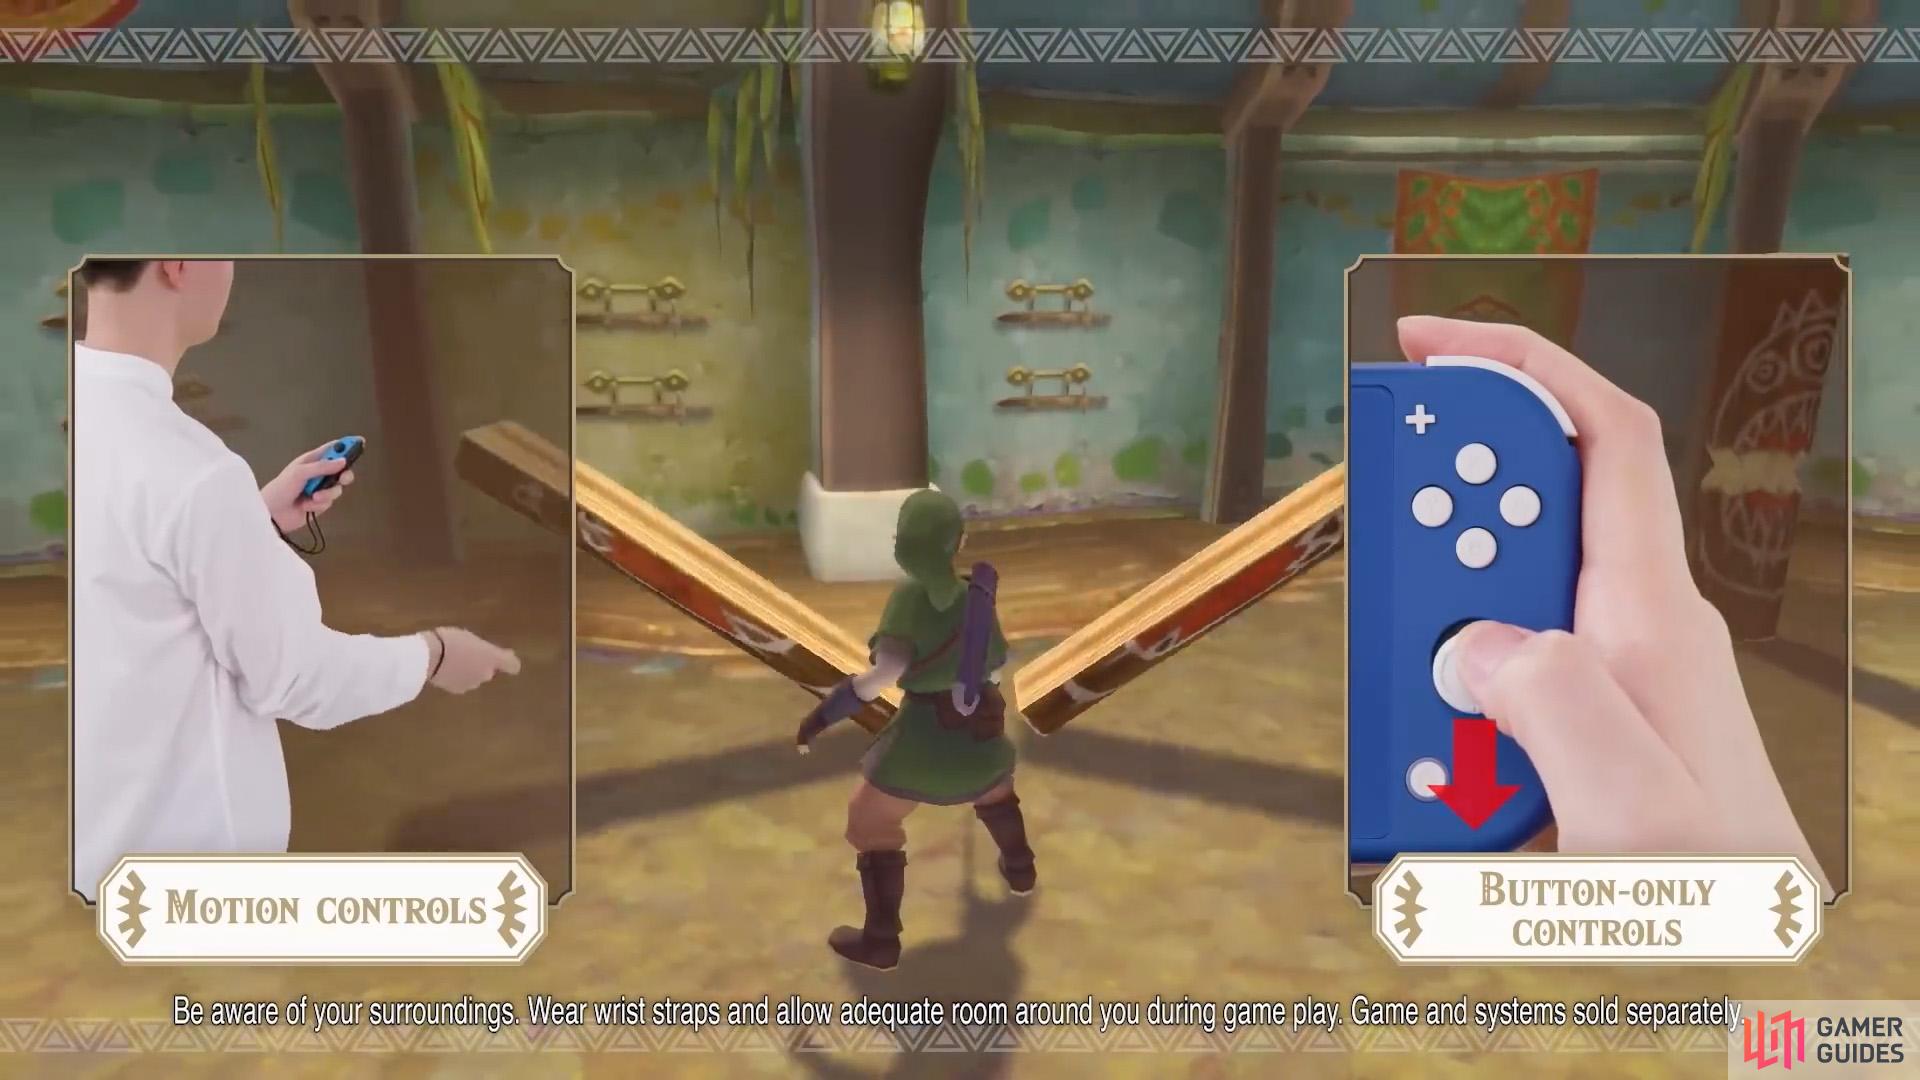 In button mode, the right stick is used to control Link's sword.